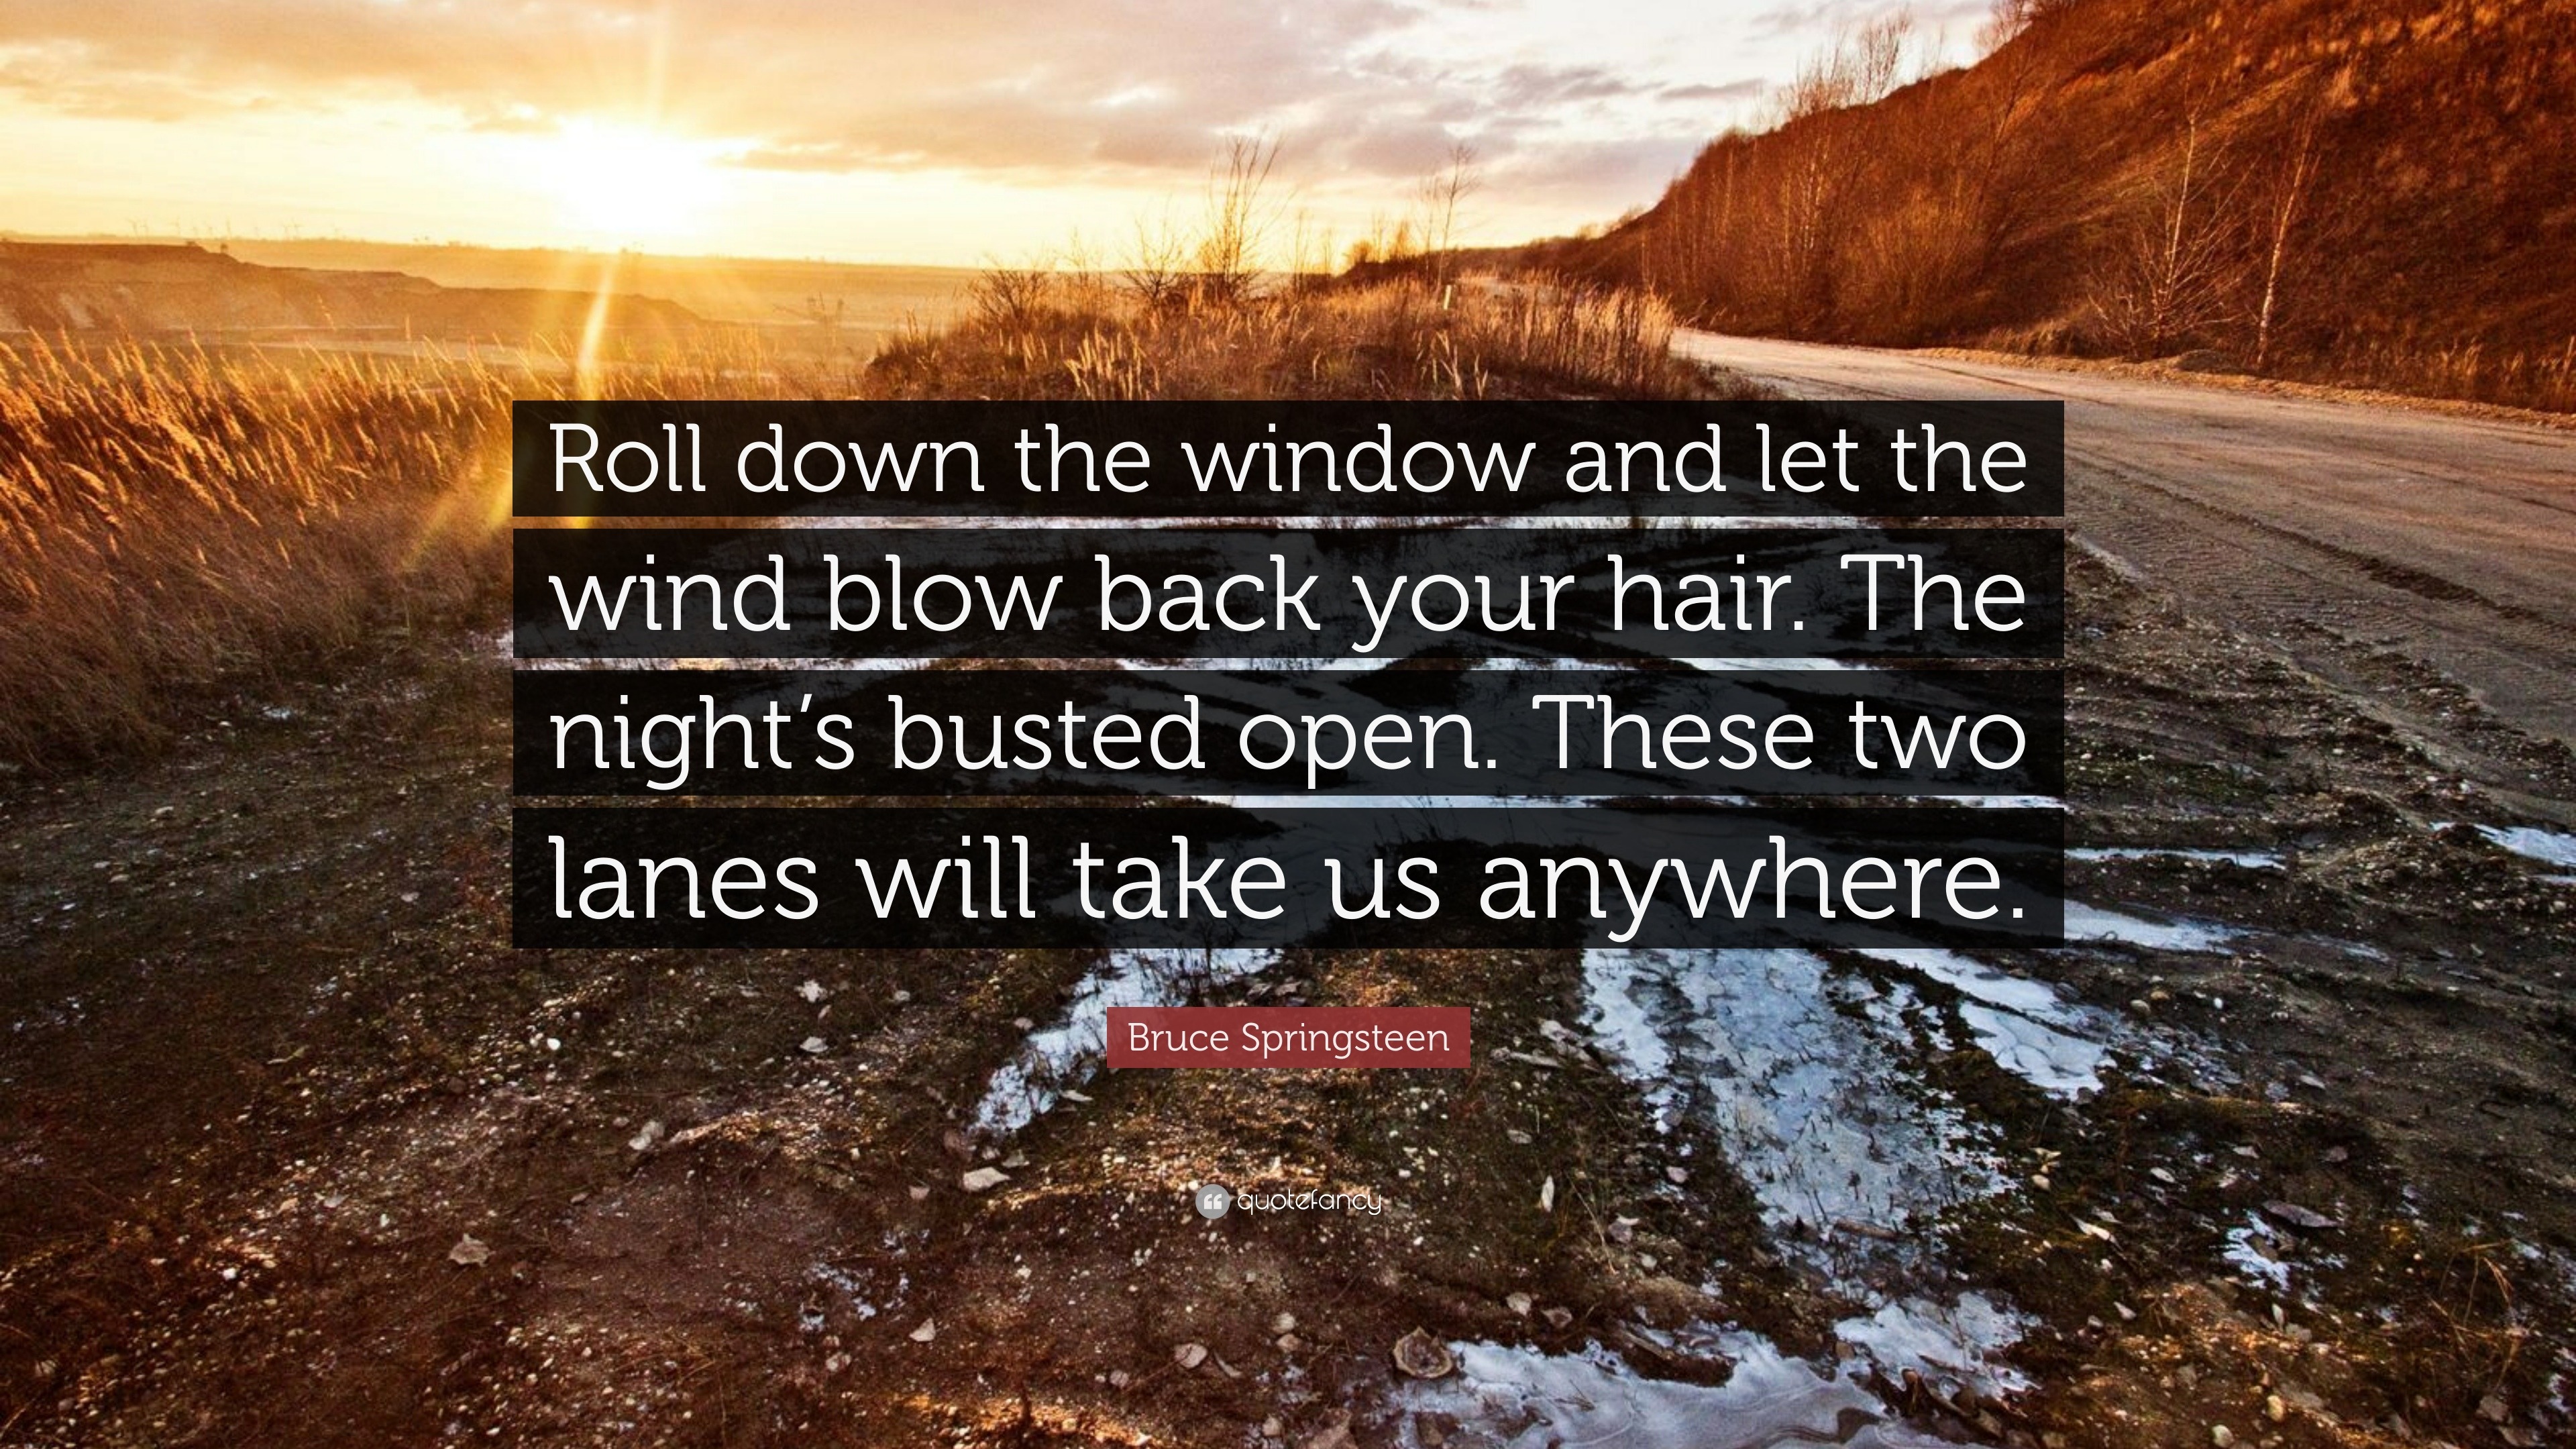 Bruce Springsteen Quote: “Roll down the window and let the wind blow back  your hair. The night's busted open. These two lanes will take us anywher...”